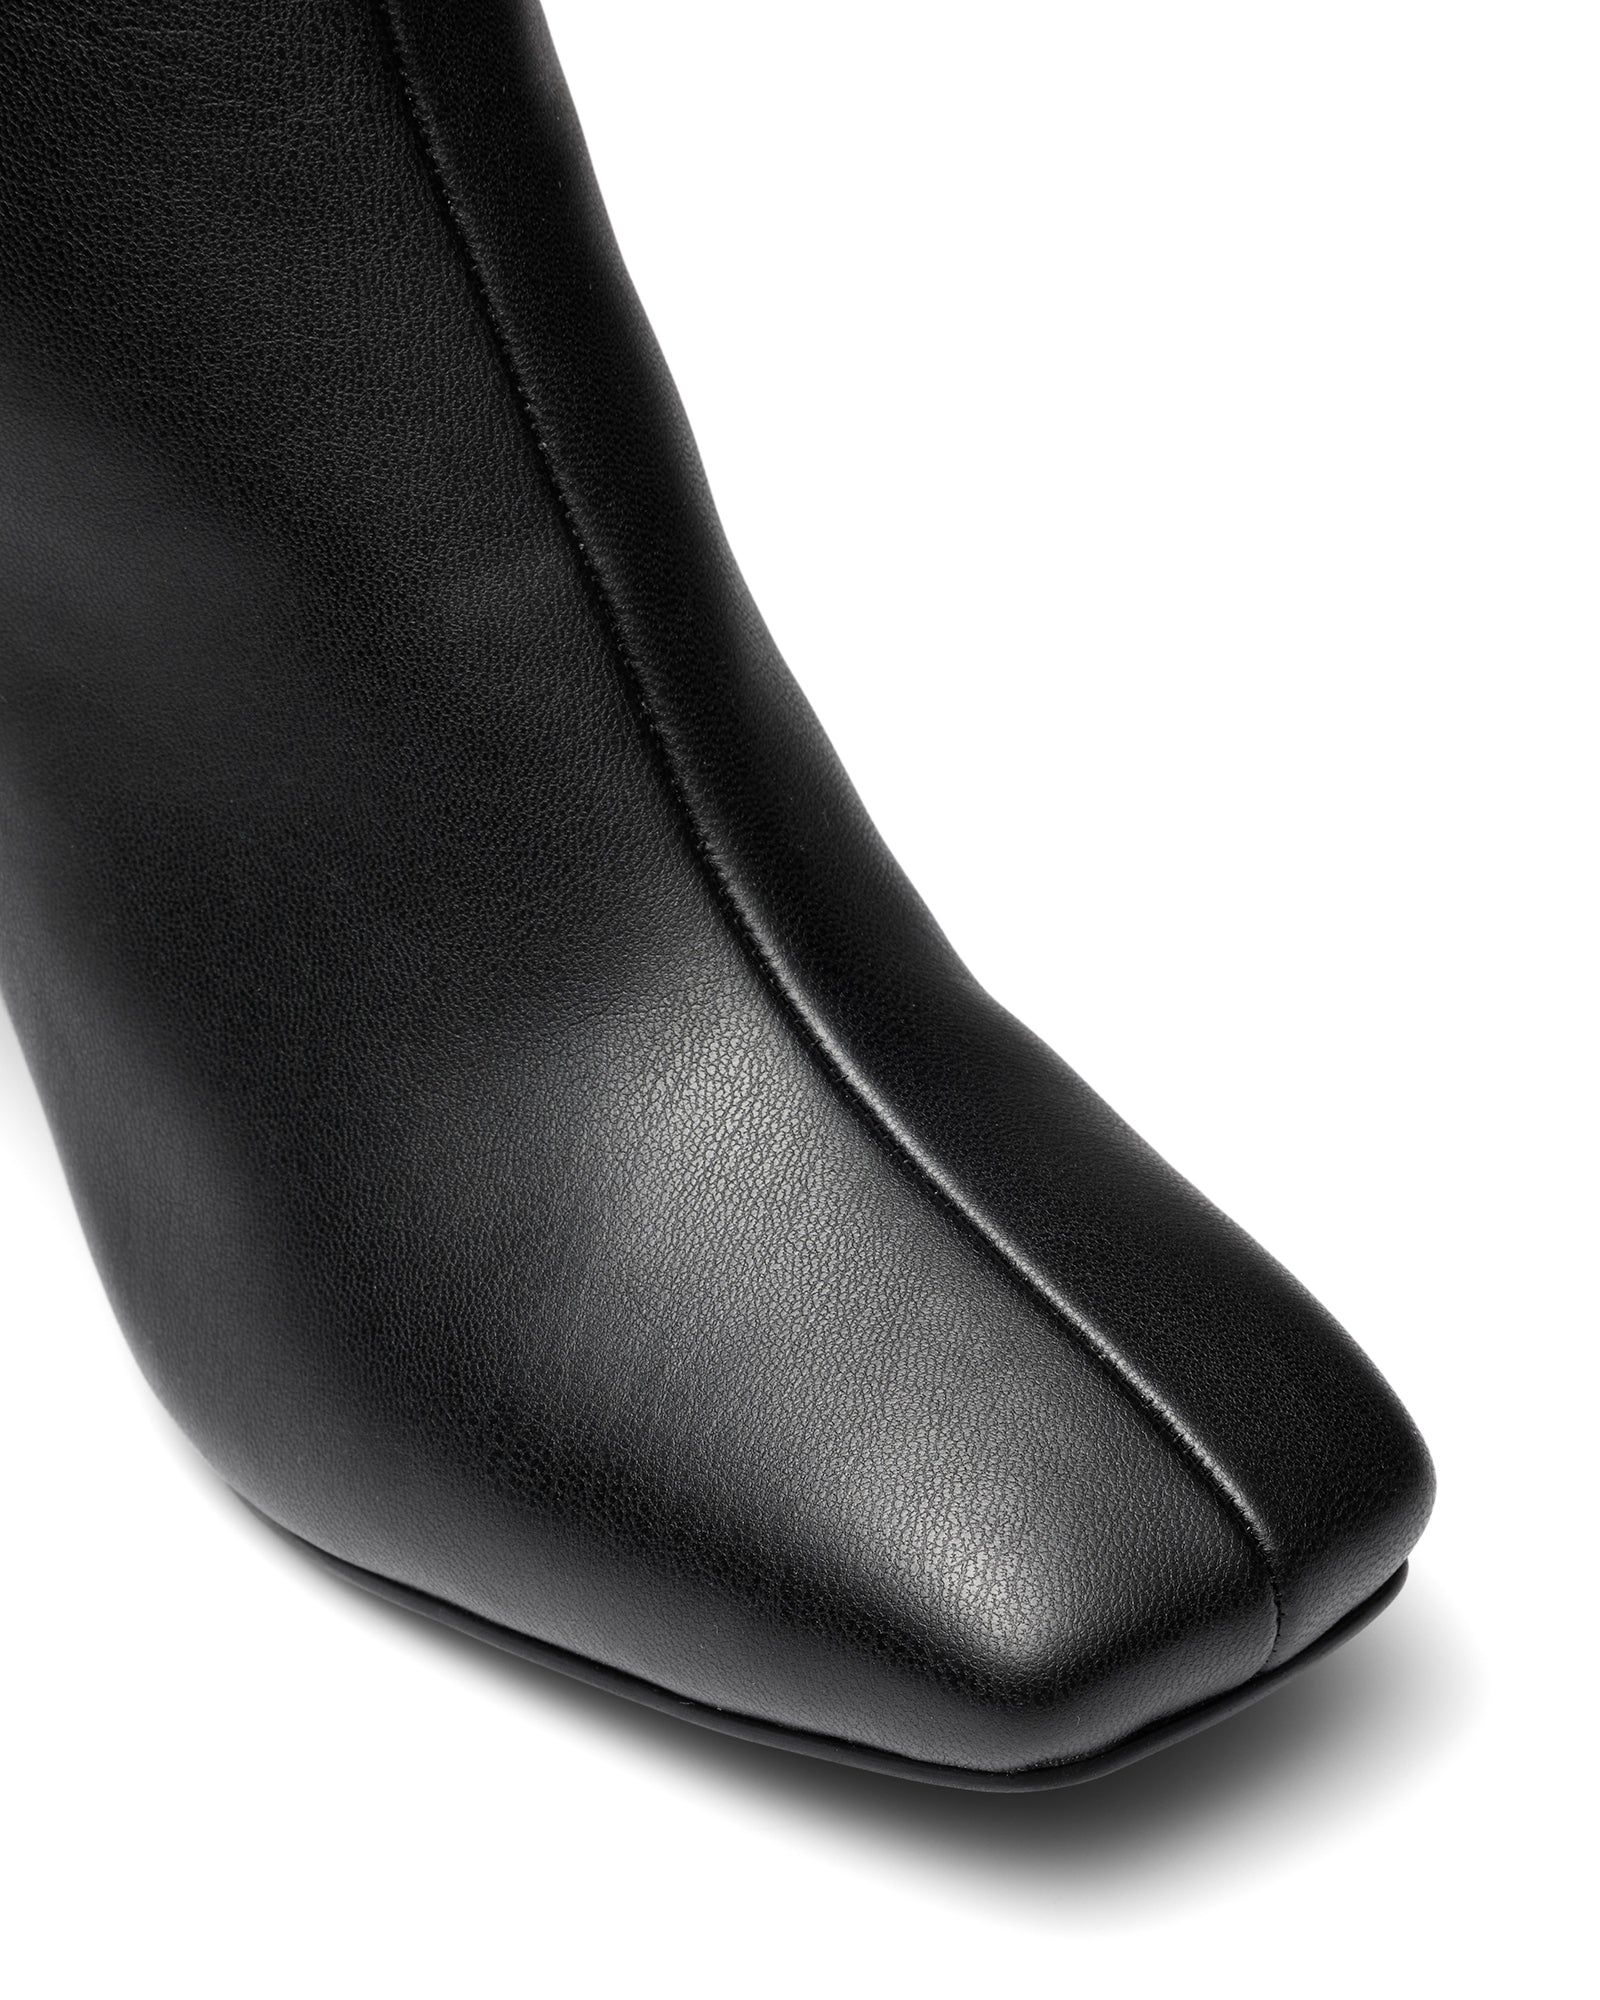 Therapy Shoes Candid Black | Women's Boots | Knee High | Tall | Stiletto